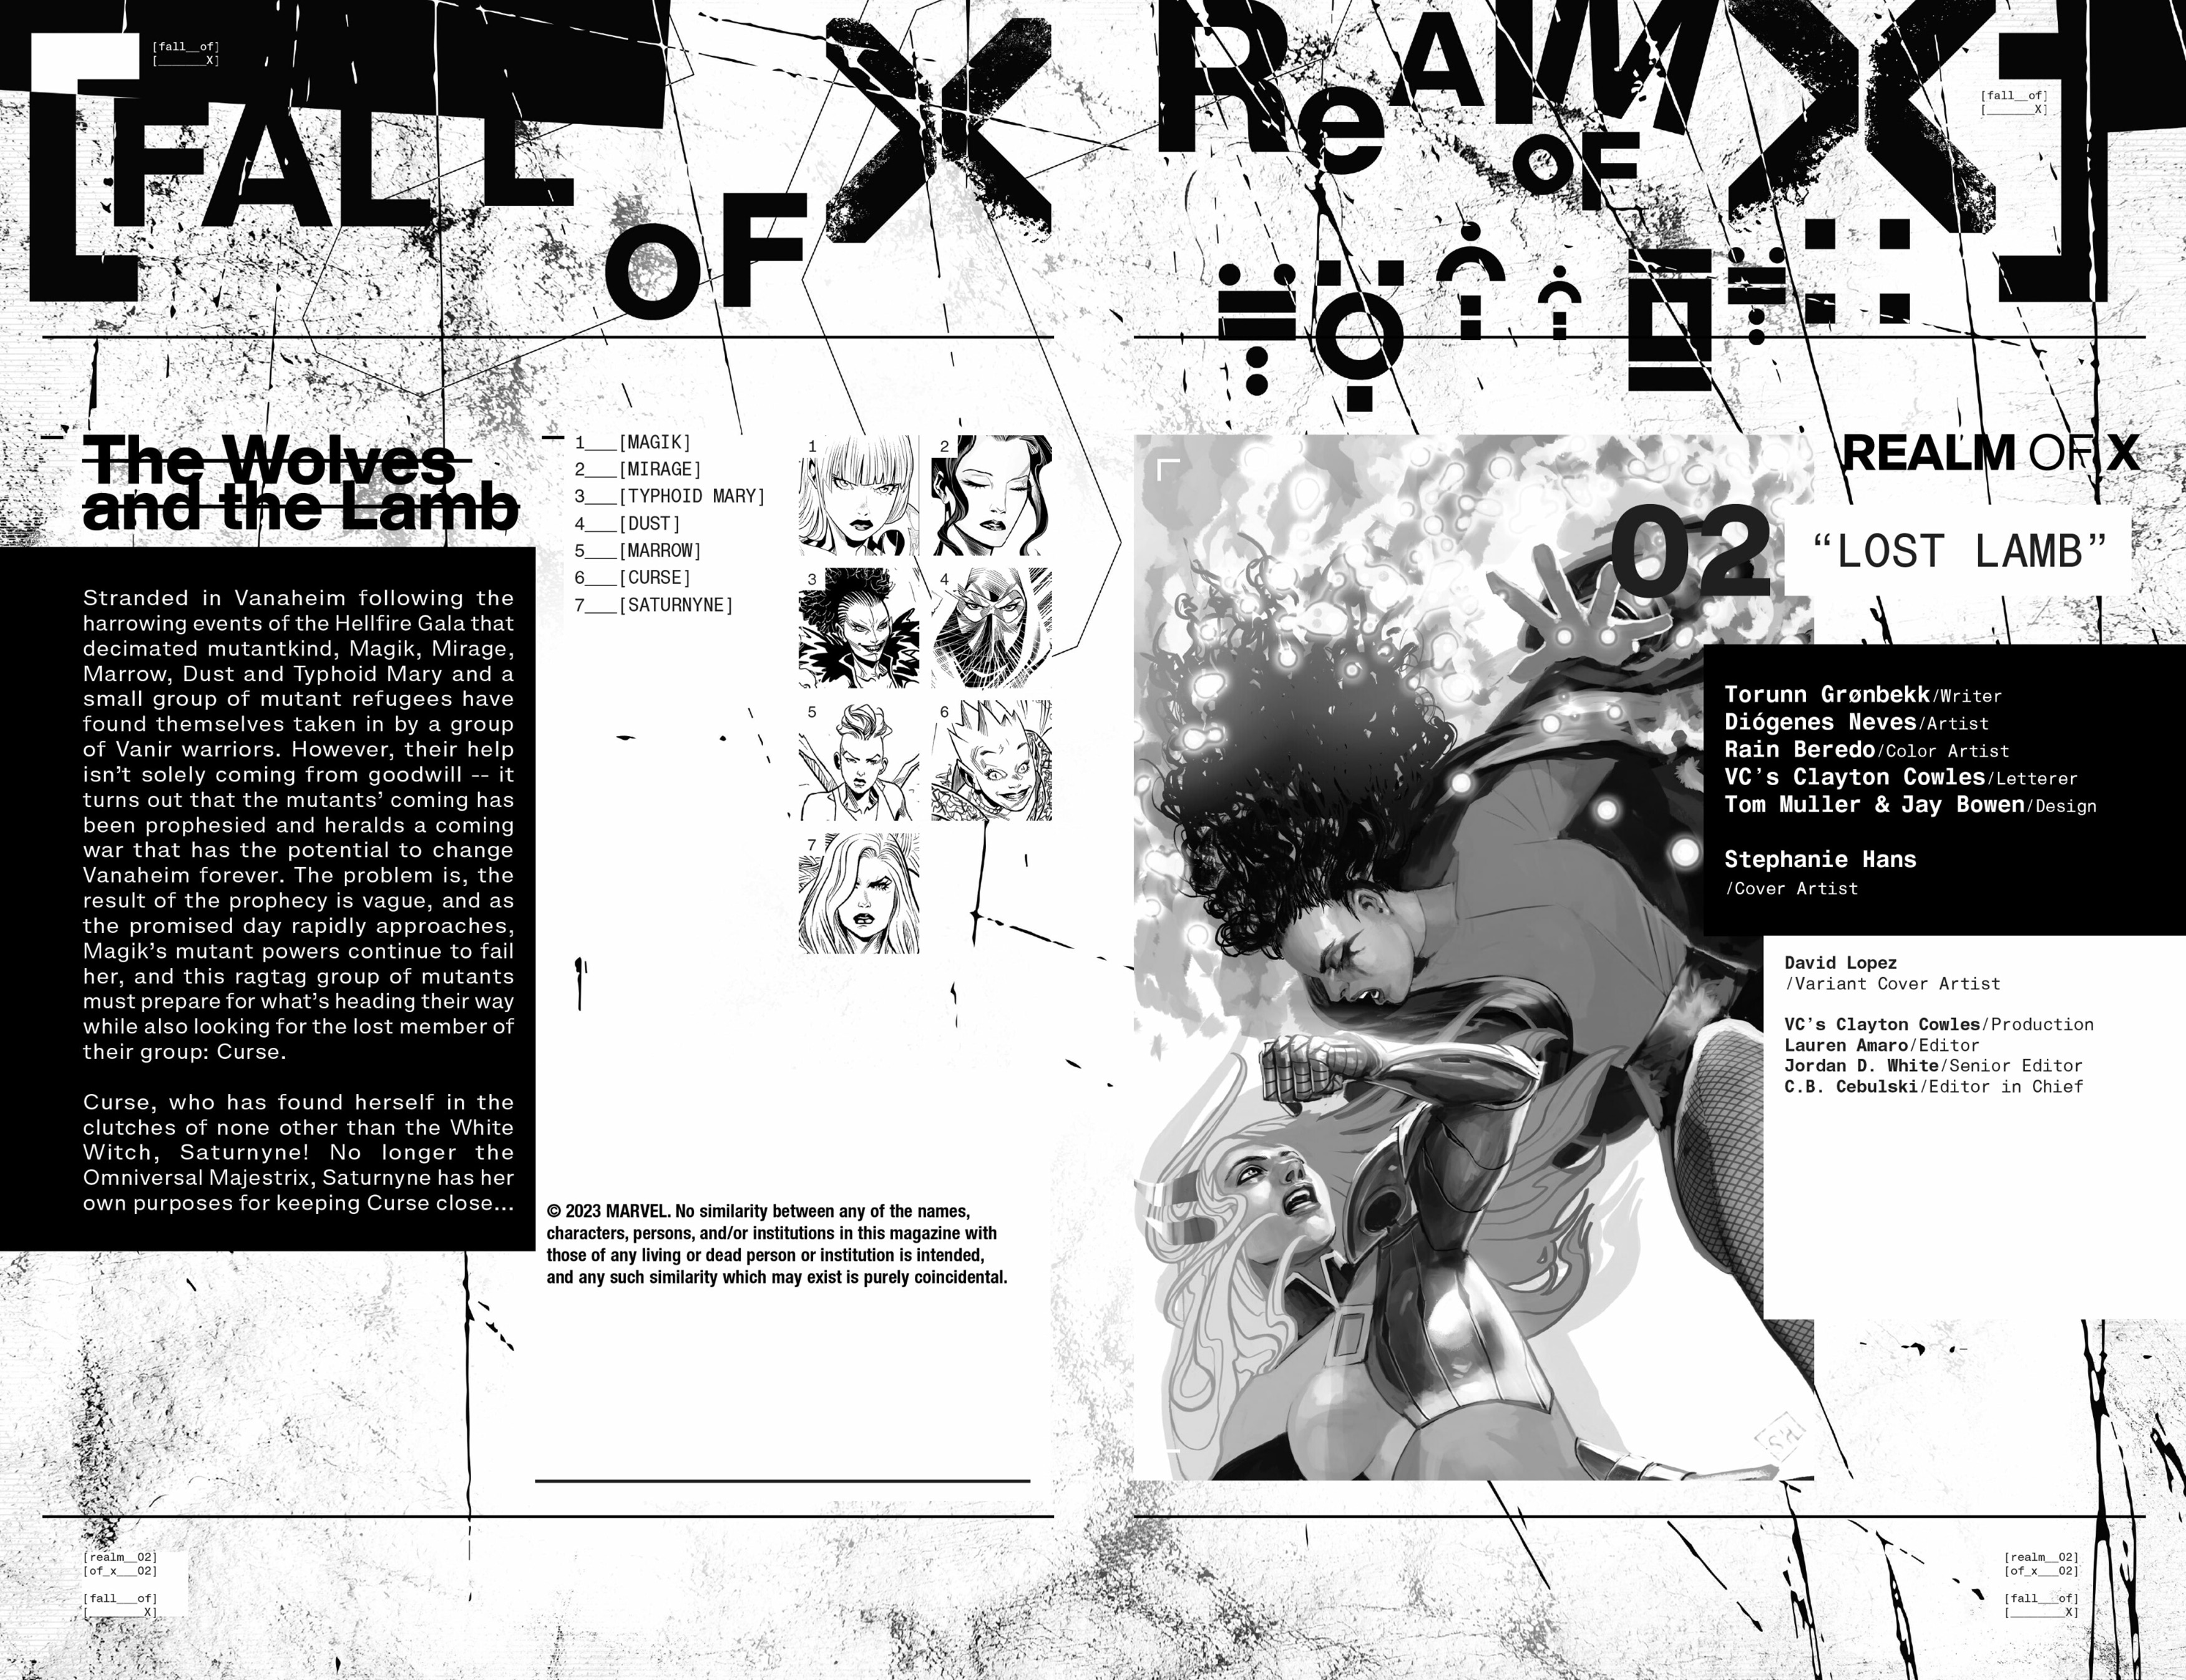 Read online Realm of X comic -  Issue #2 - 4